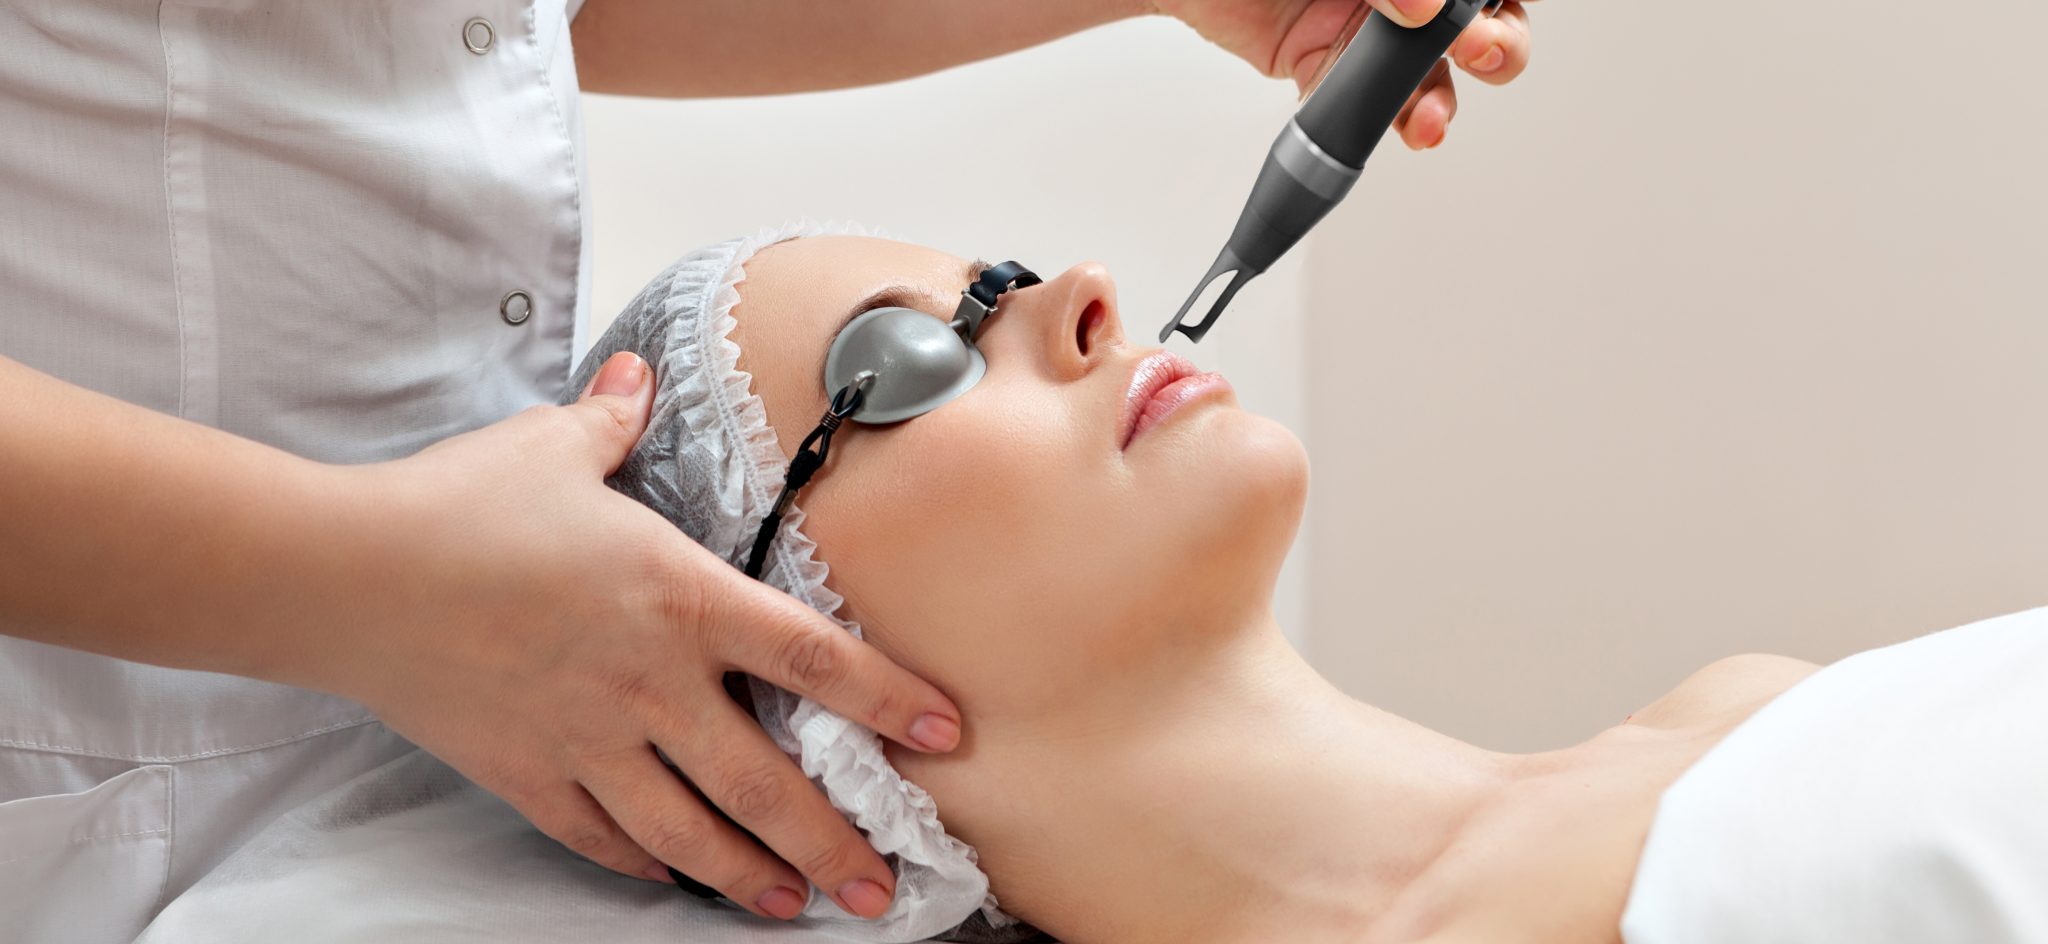 How Many Laser Treatments Will I Need to Get? | Dr. Rousso